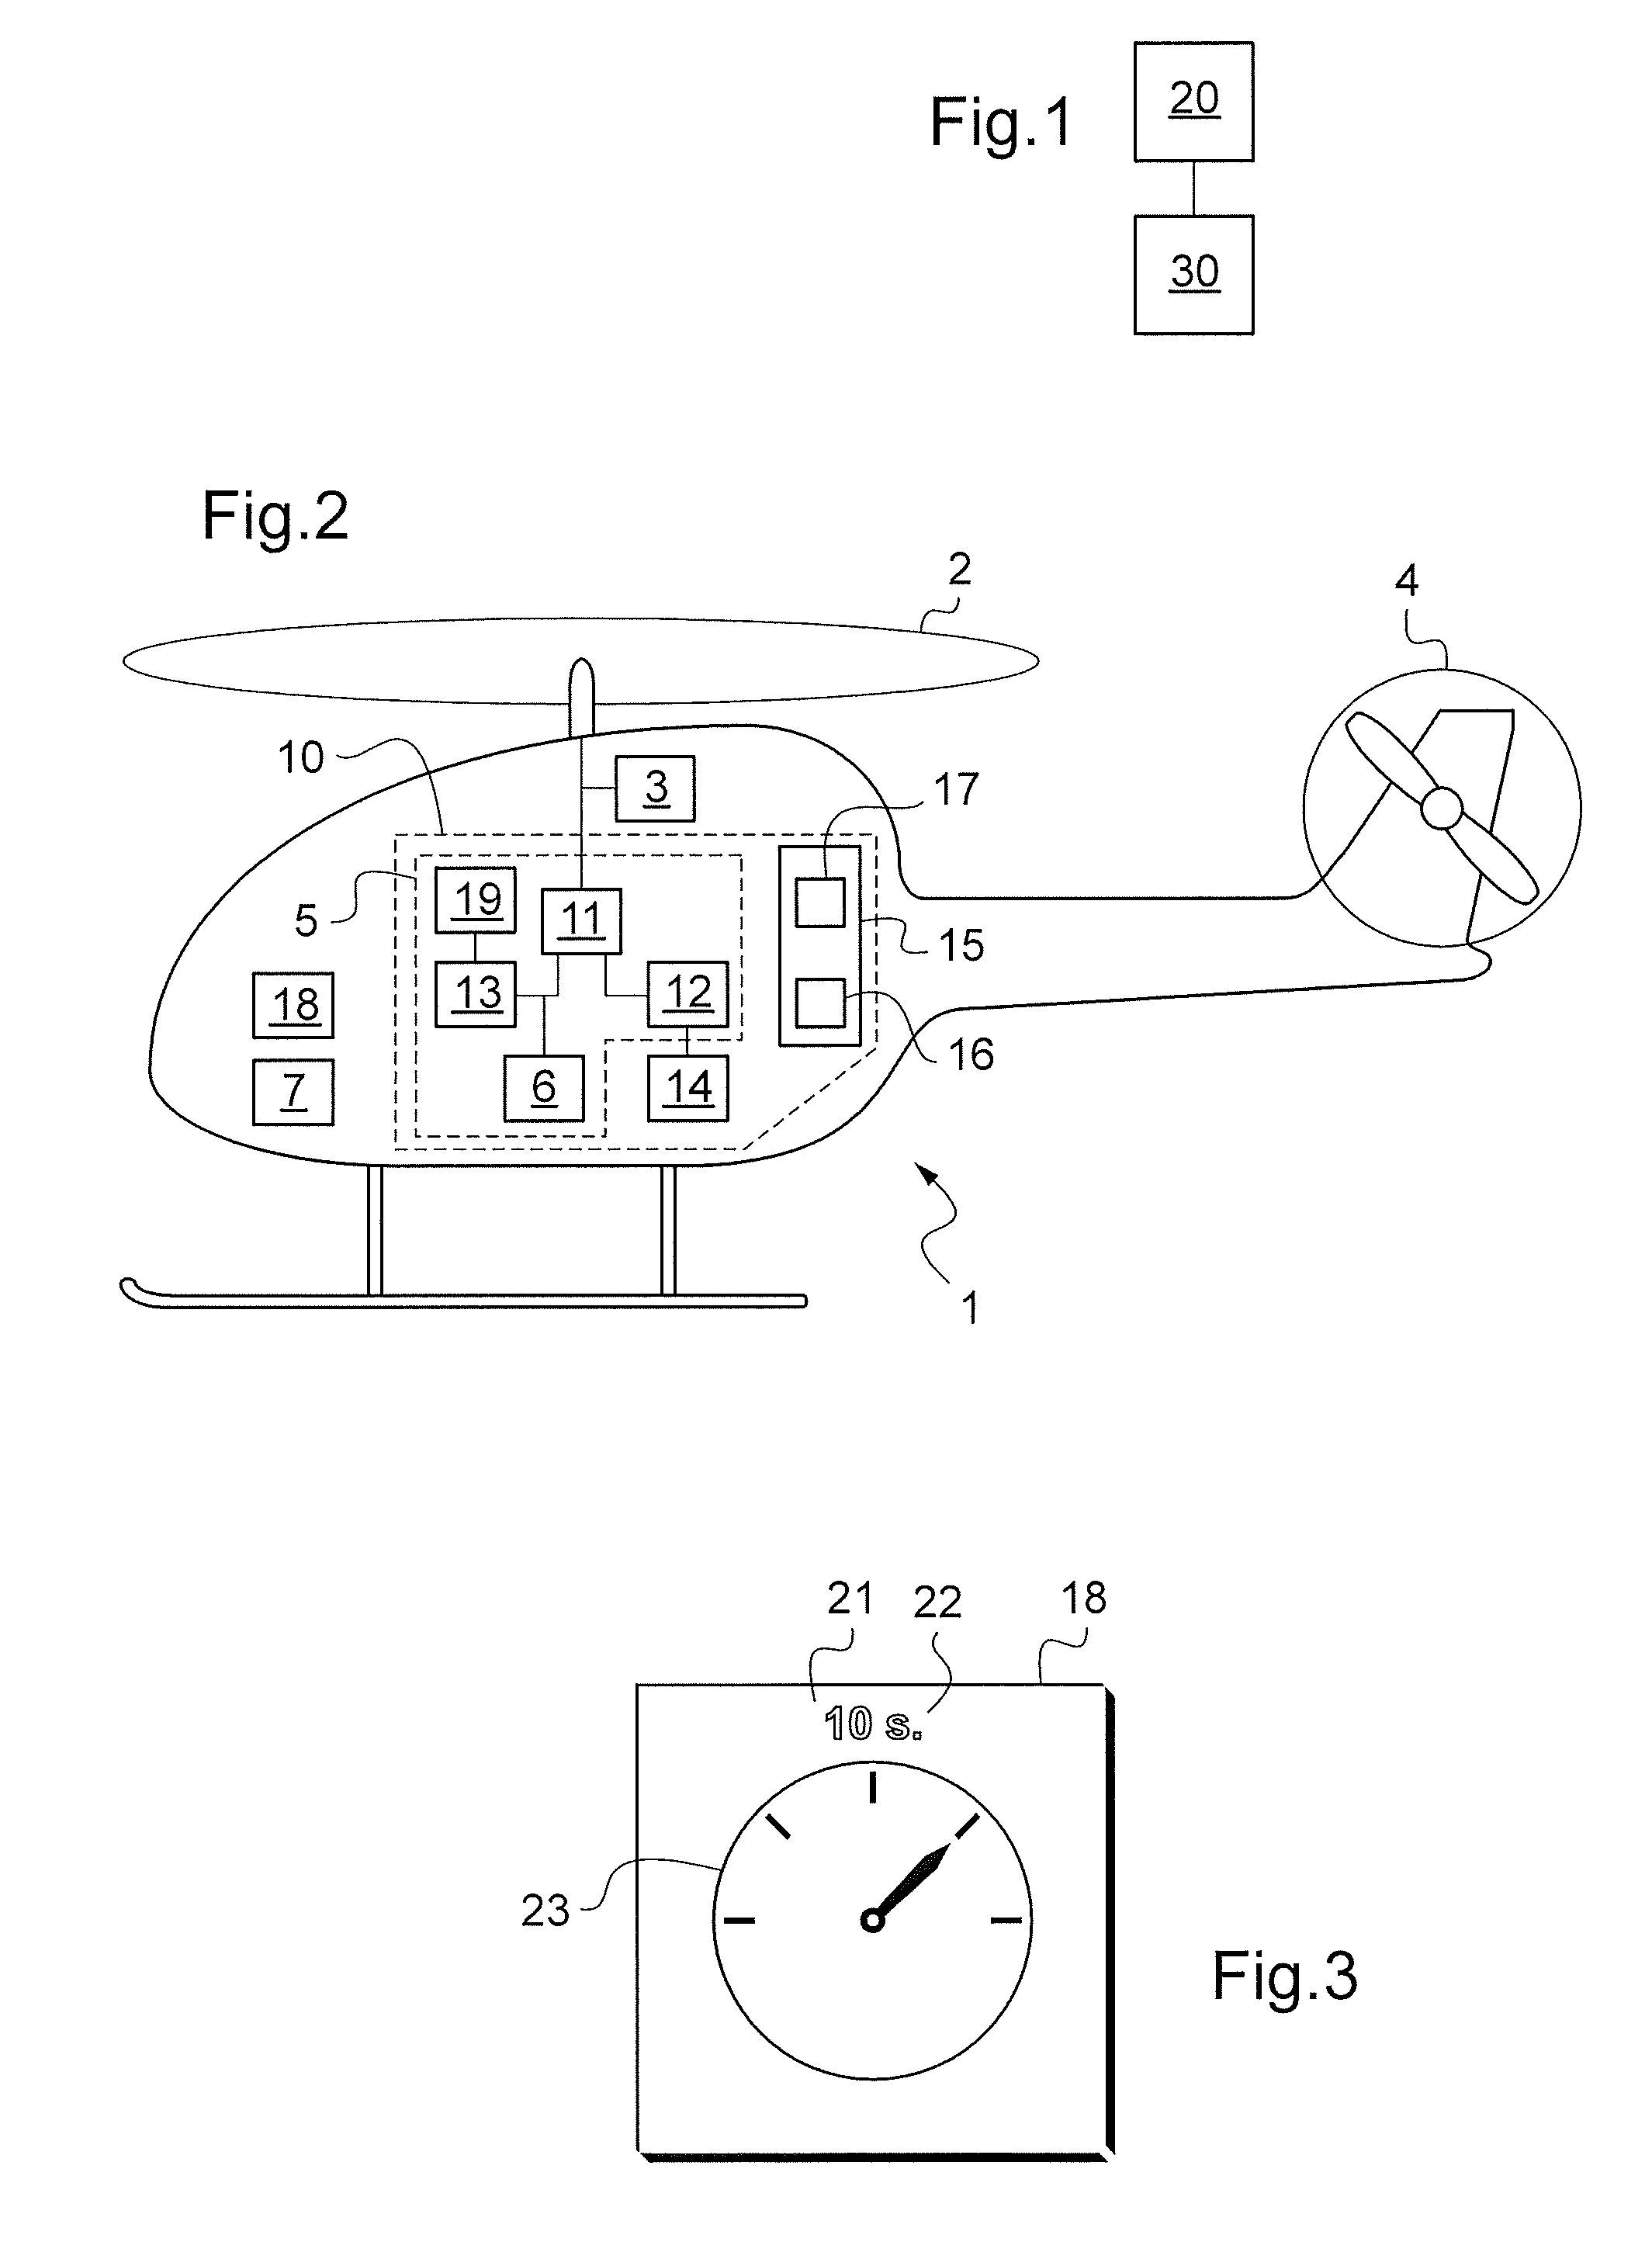 Method of assisting a pilot of a single-engined rotary wing aircraft during a stage of flight in autorotation